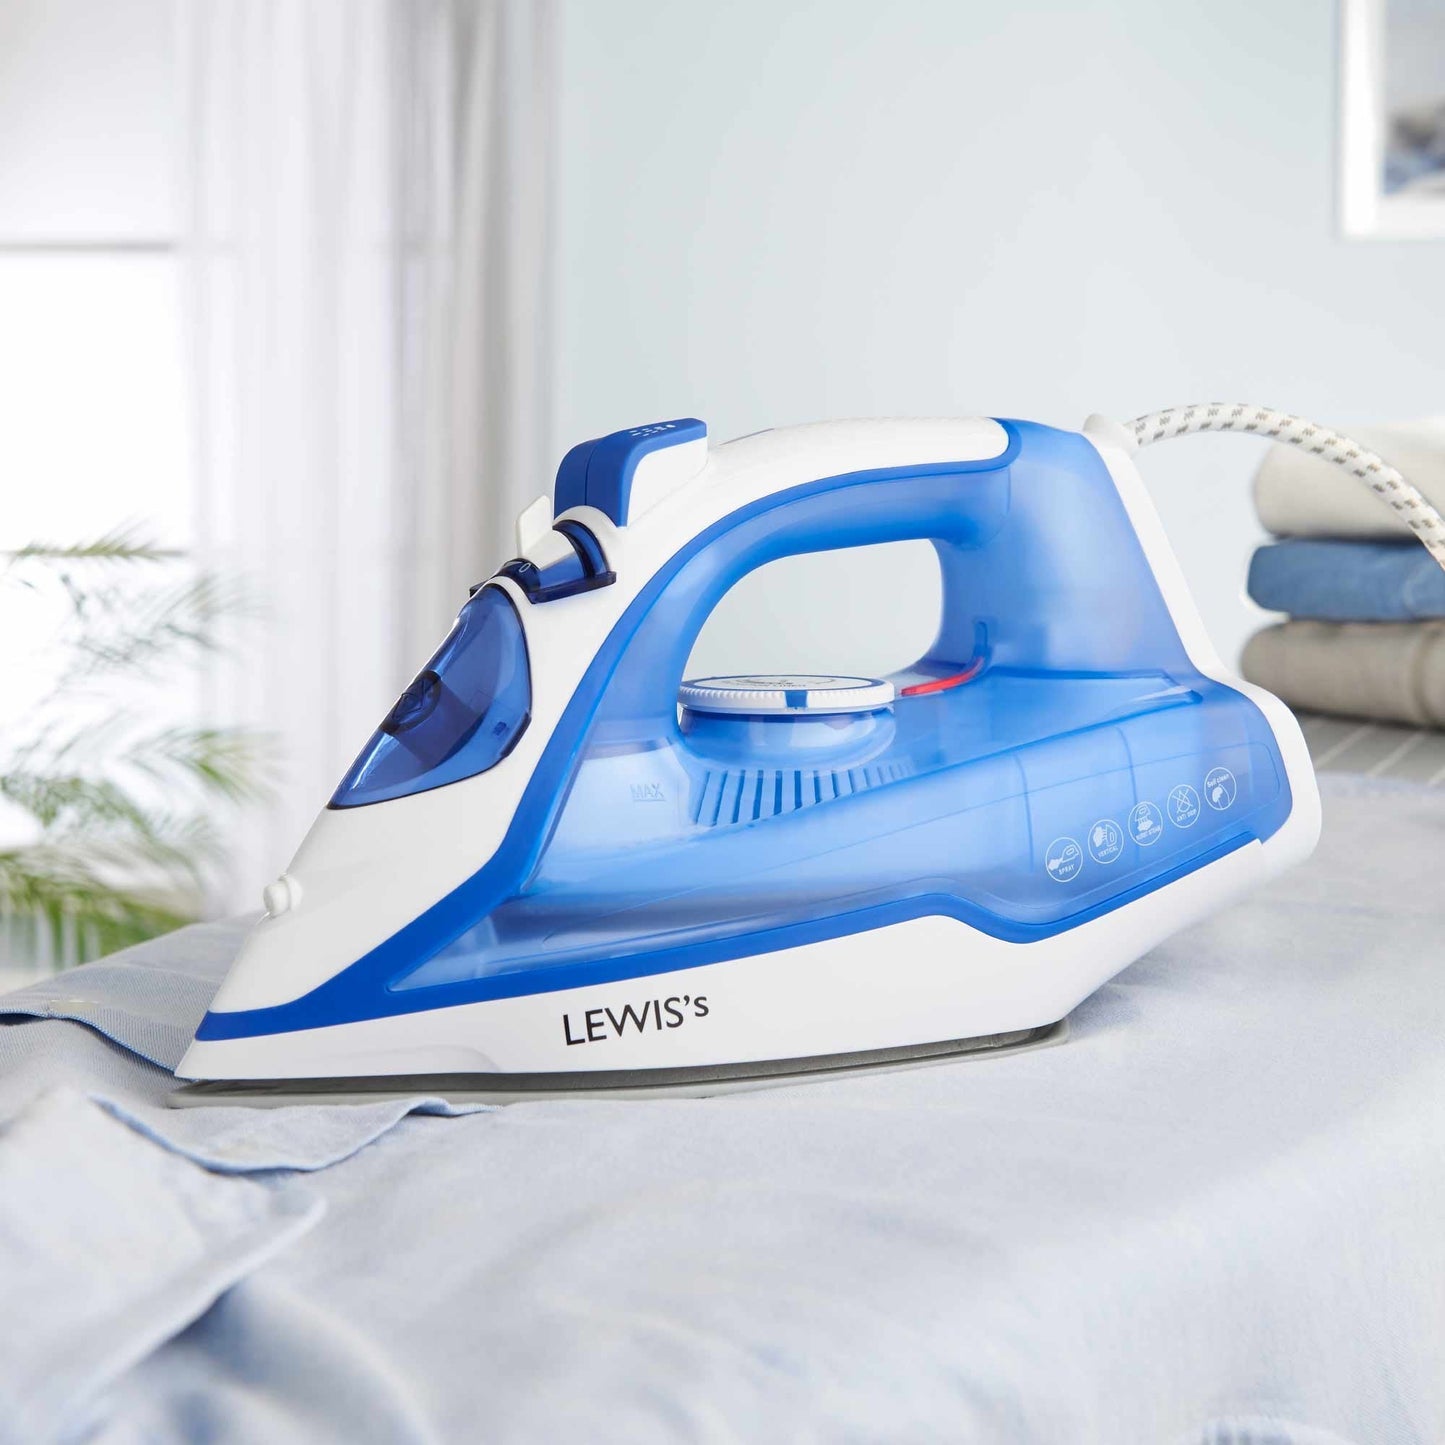 Comfi Glide 2200W Steam Iron Home Laundry Clothing Appliance Wired White Blue